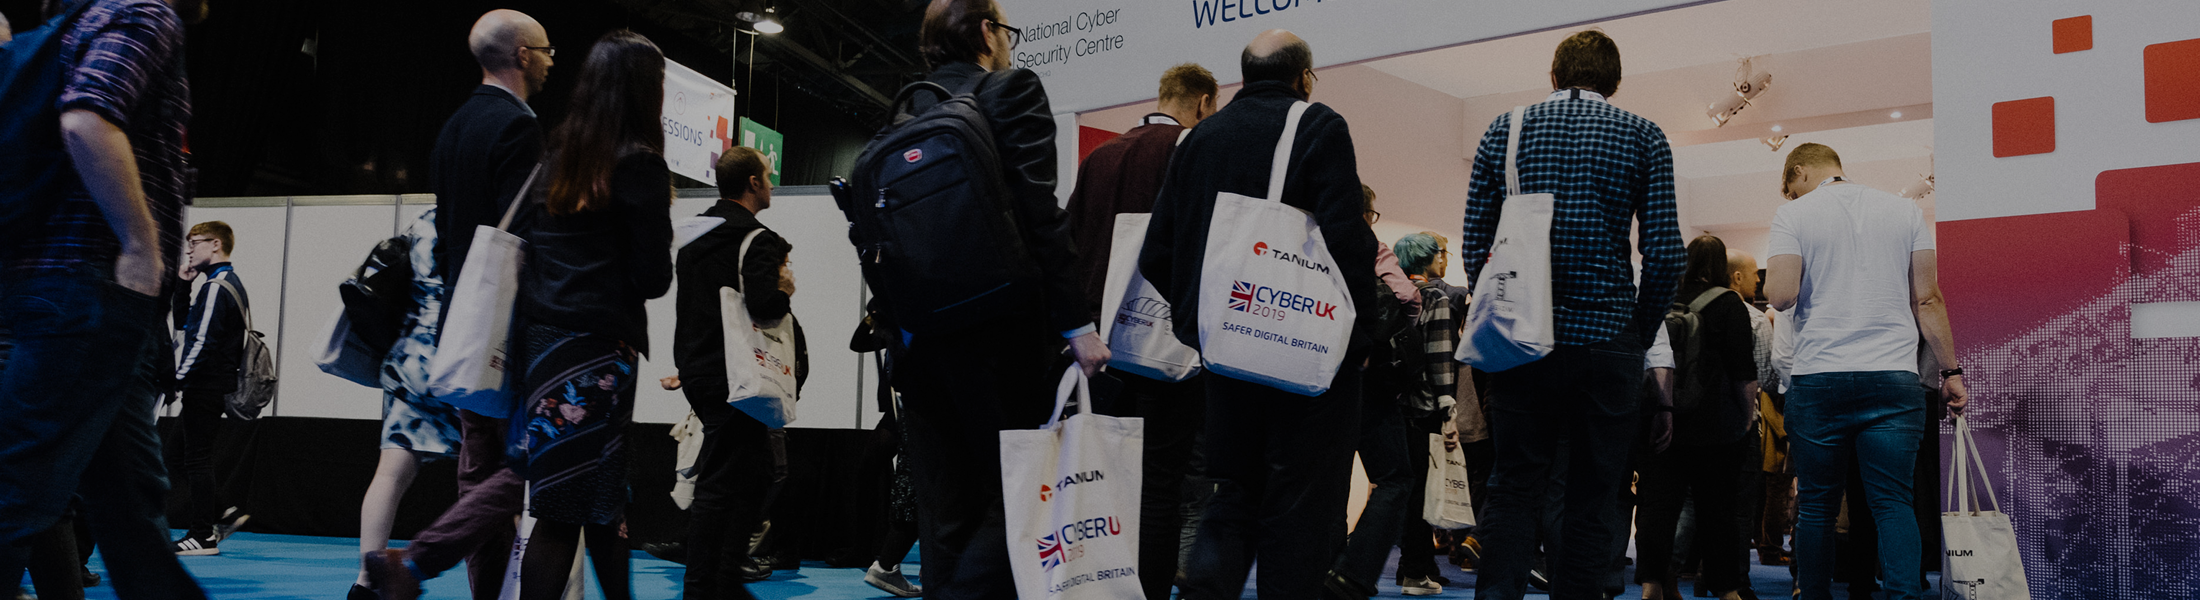 A group of delegates walking into CYBERUK 